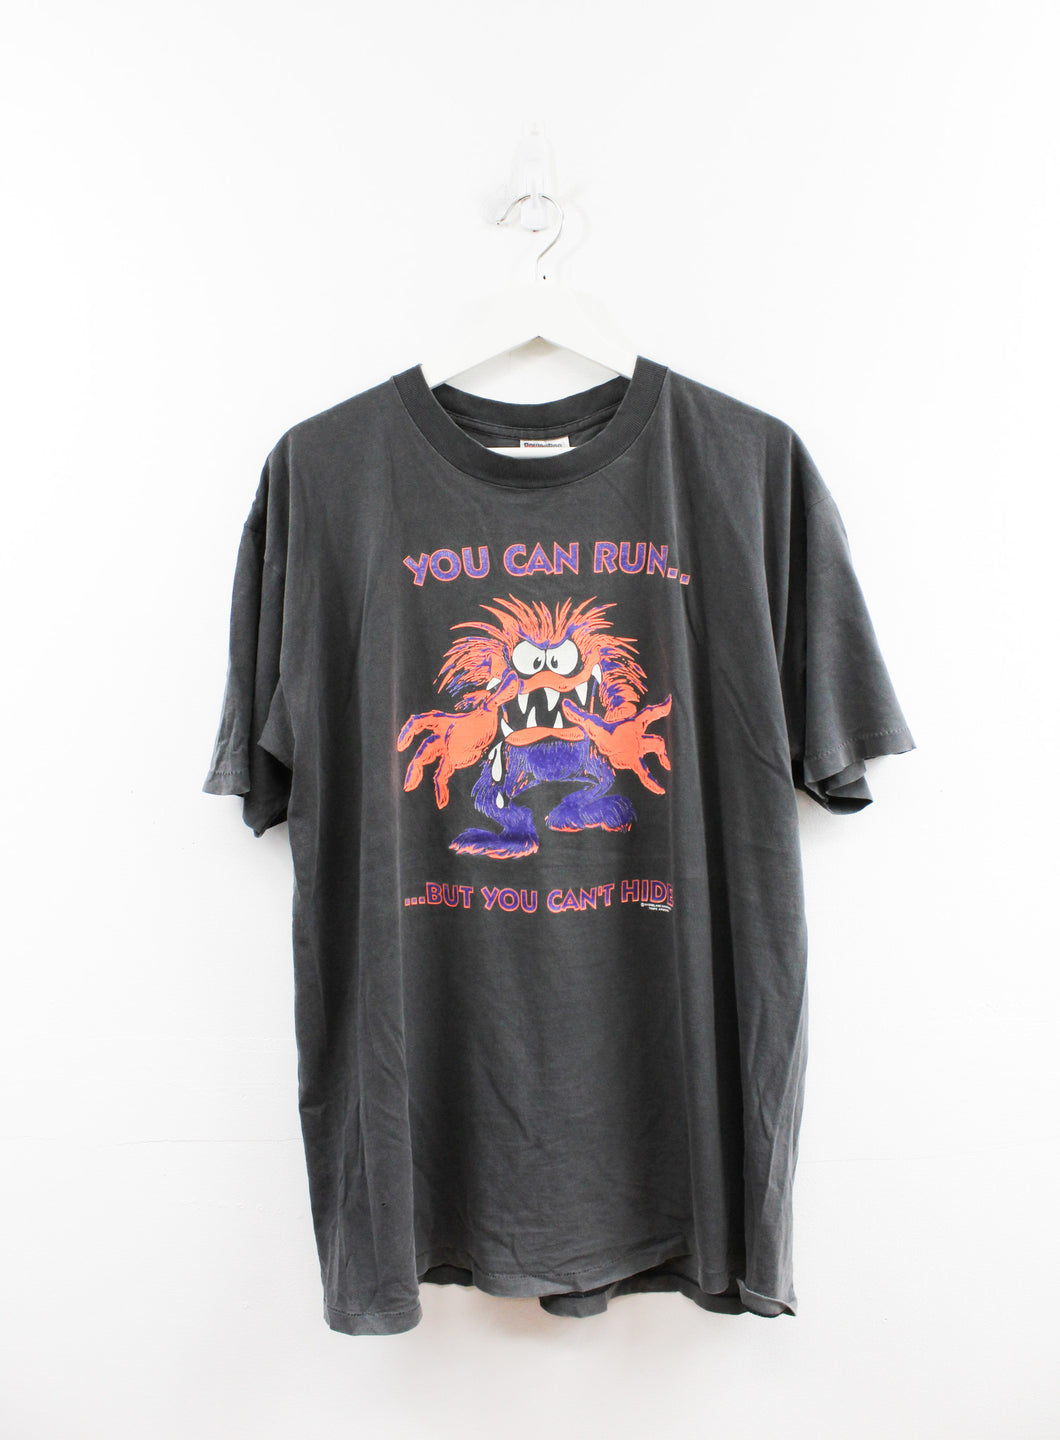 Vintage Single Stitch You Can Run But You Can't Hide Tee